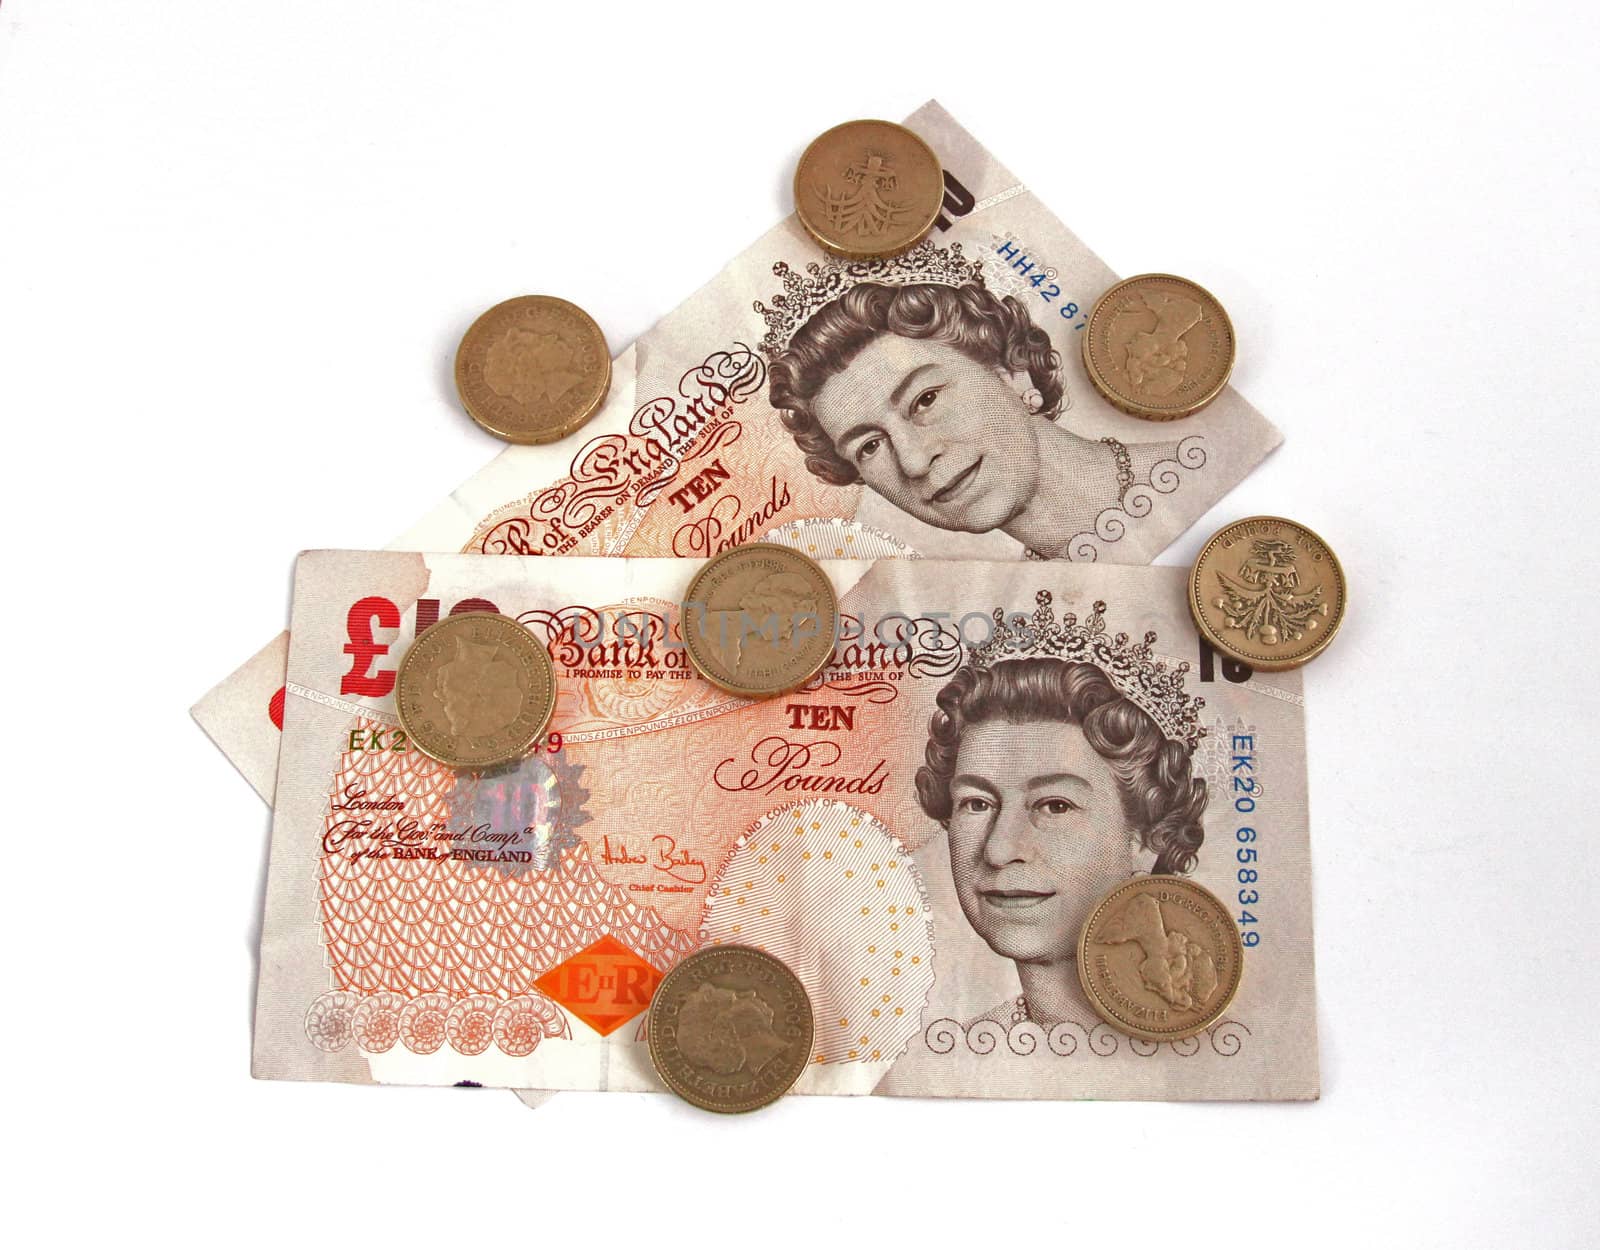 British (uk) currency on a plain background.